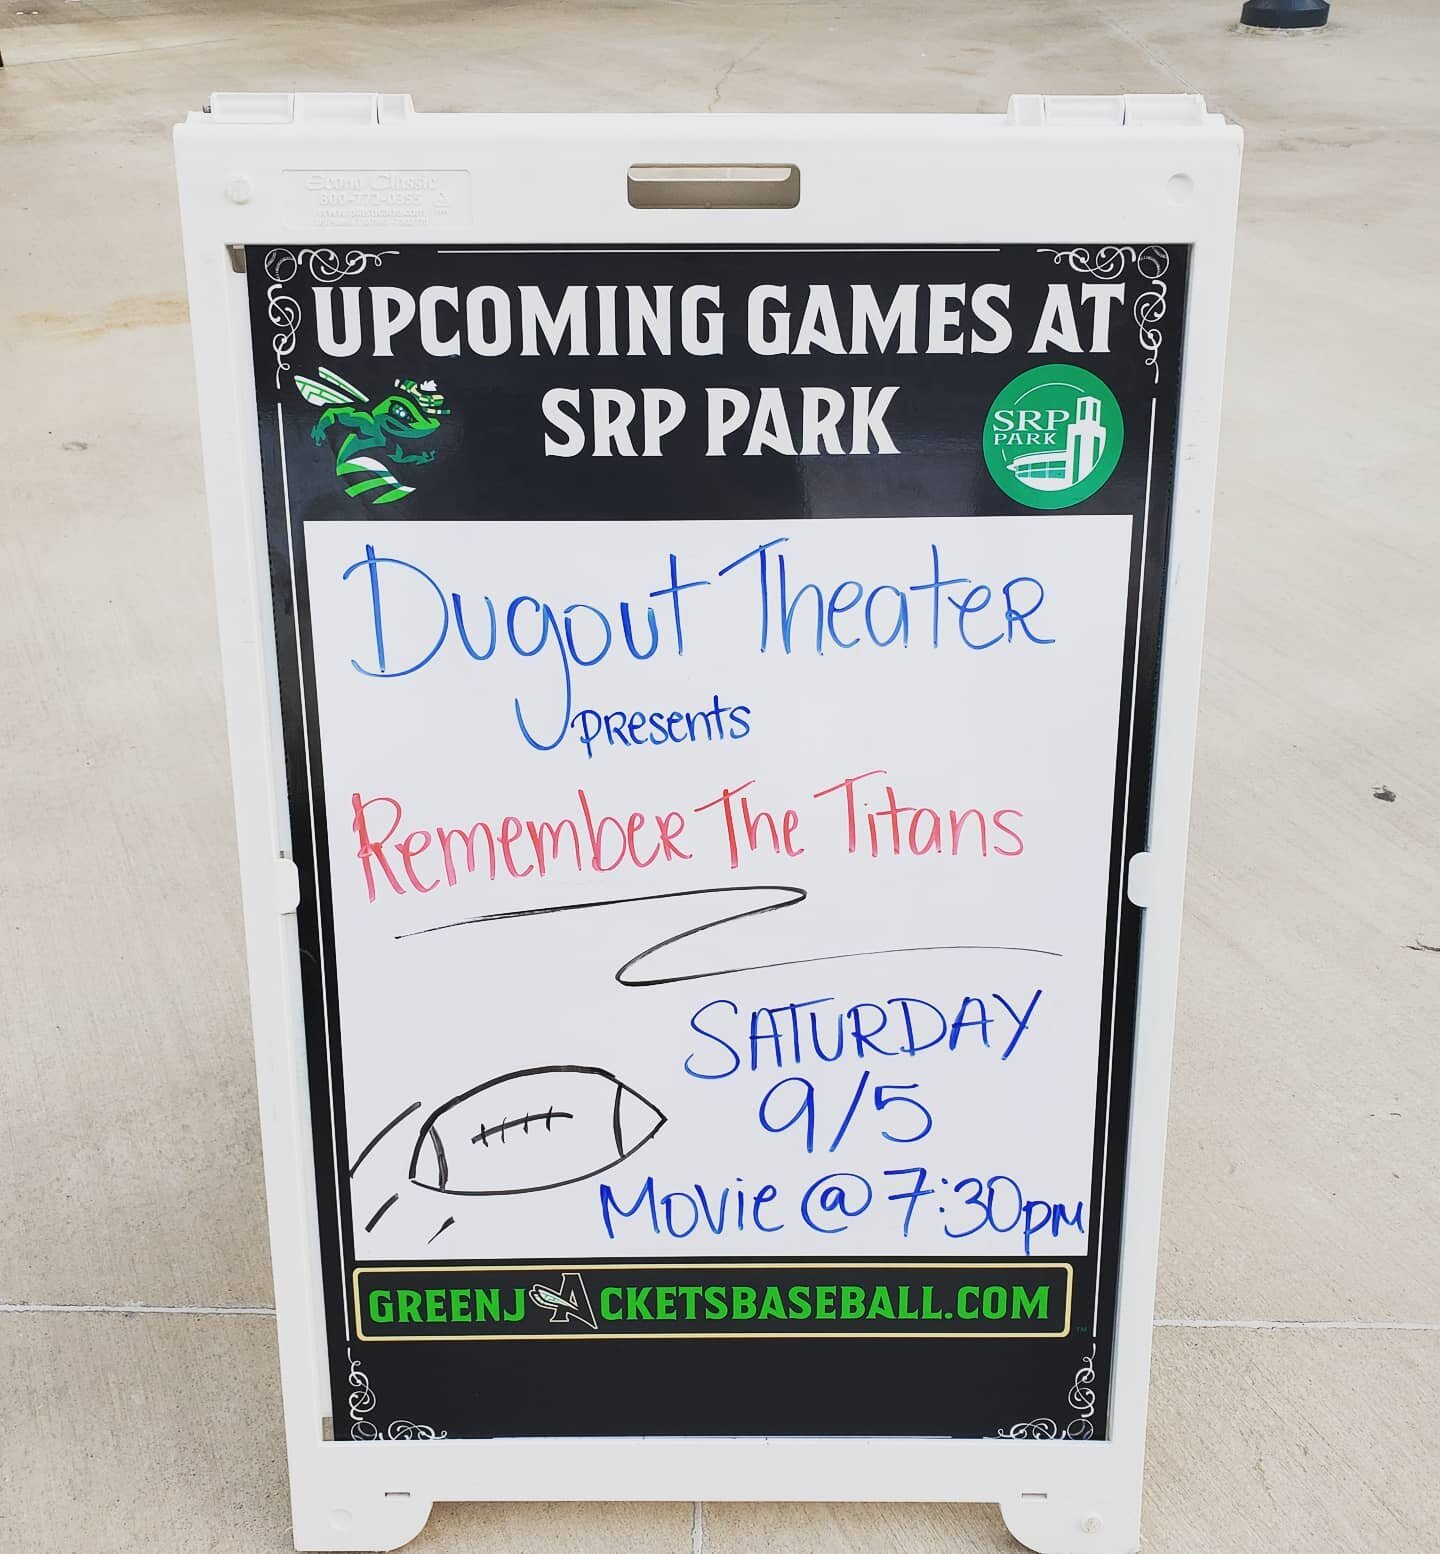 Don't forget about movie night at SRP Park this Saturday!Get your tix online now @augustagreenjackets